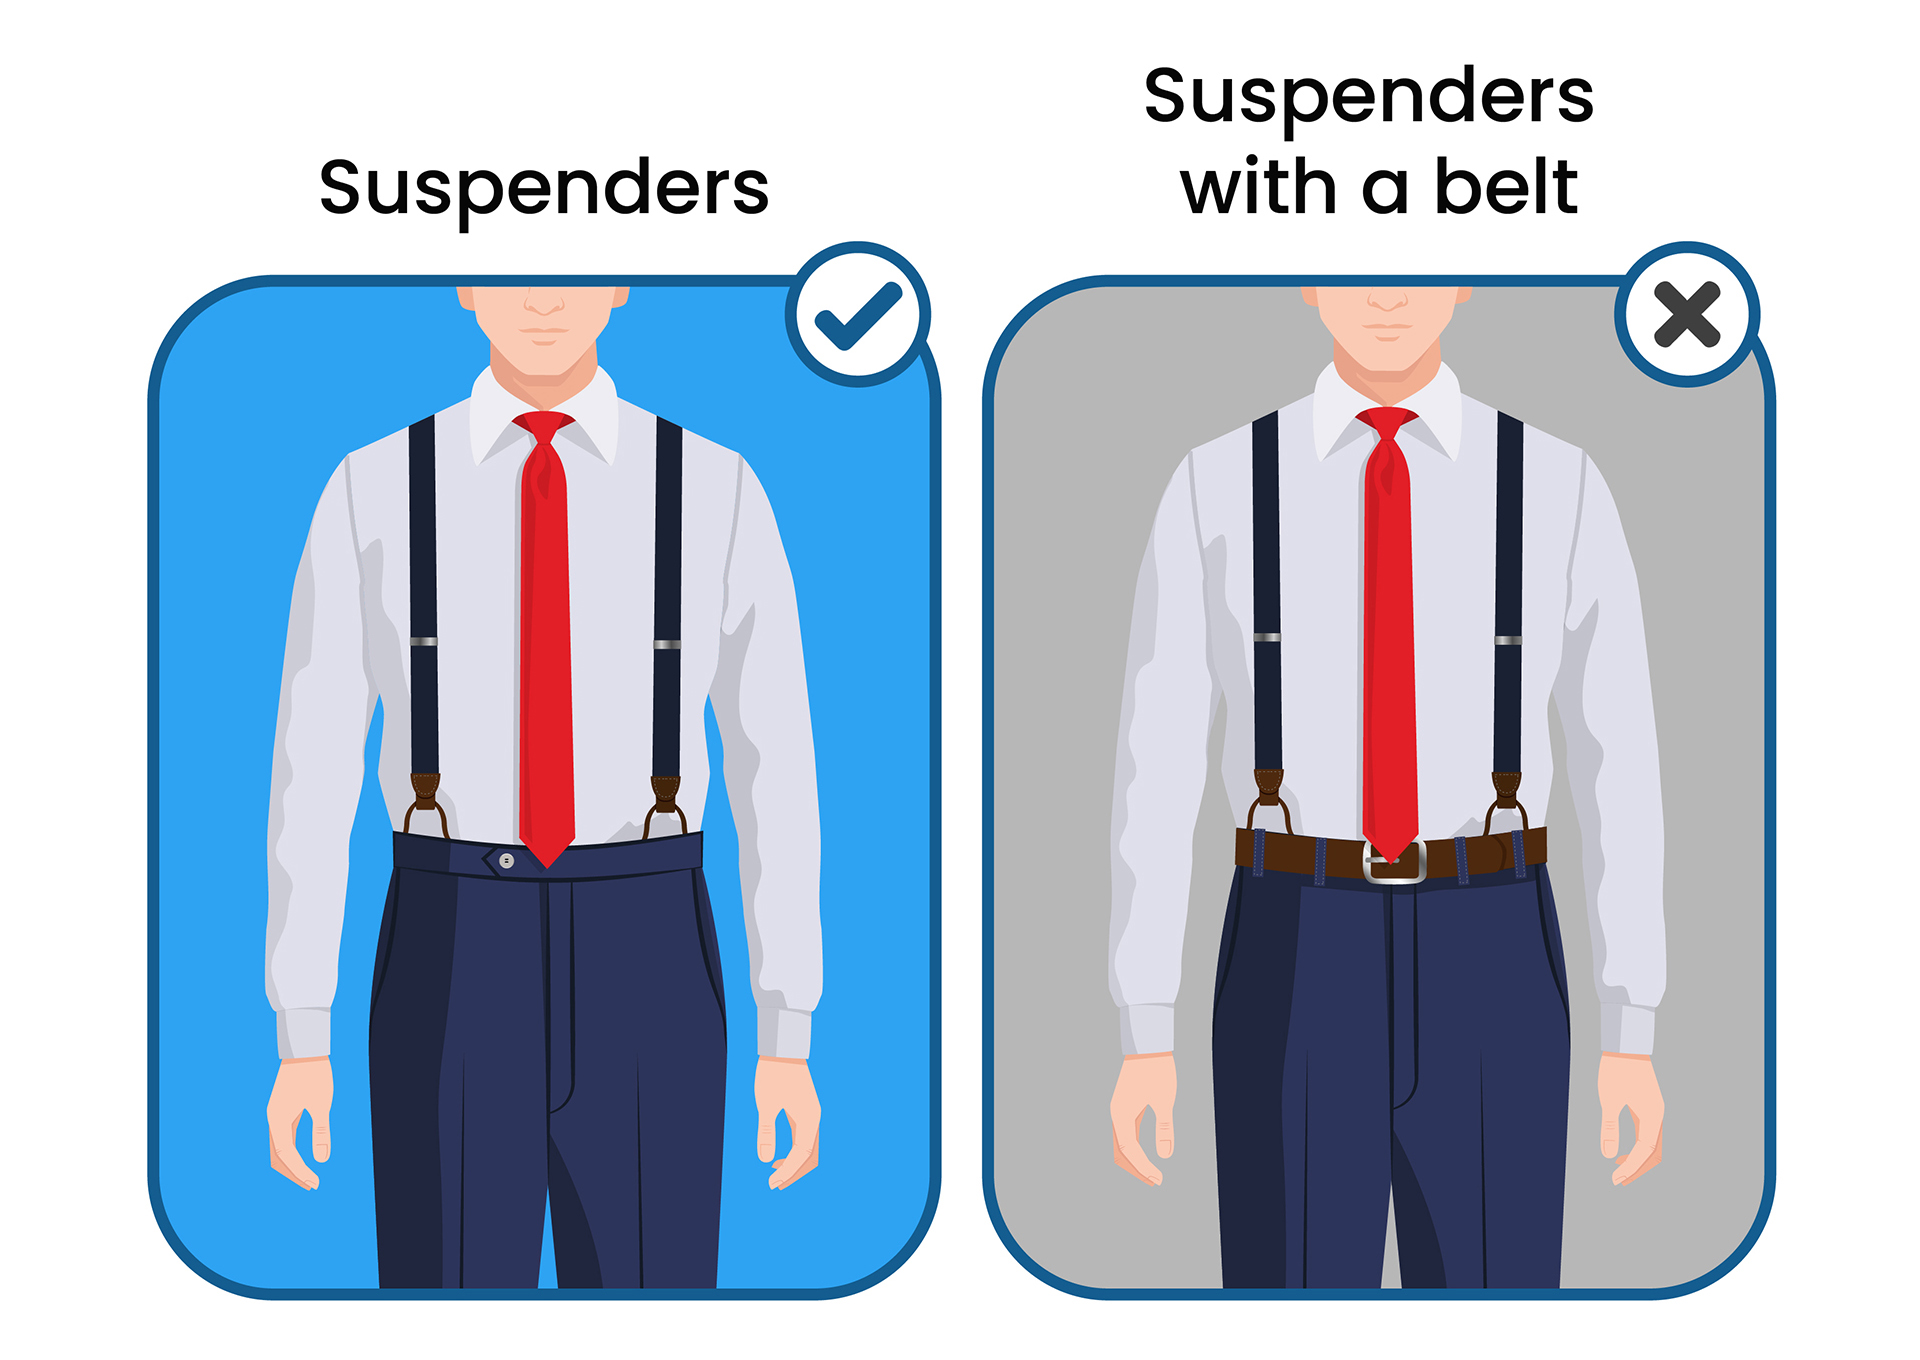 HOW TO WEAR BELTS - Style Clinic